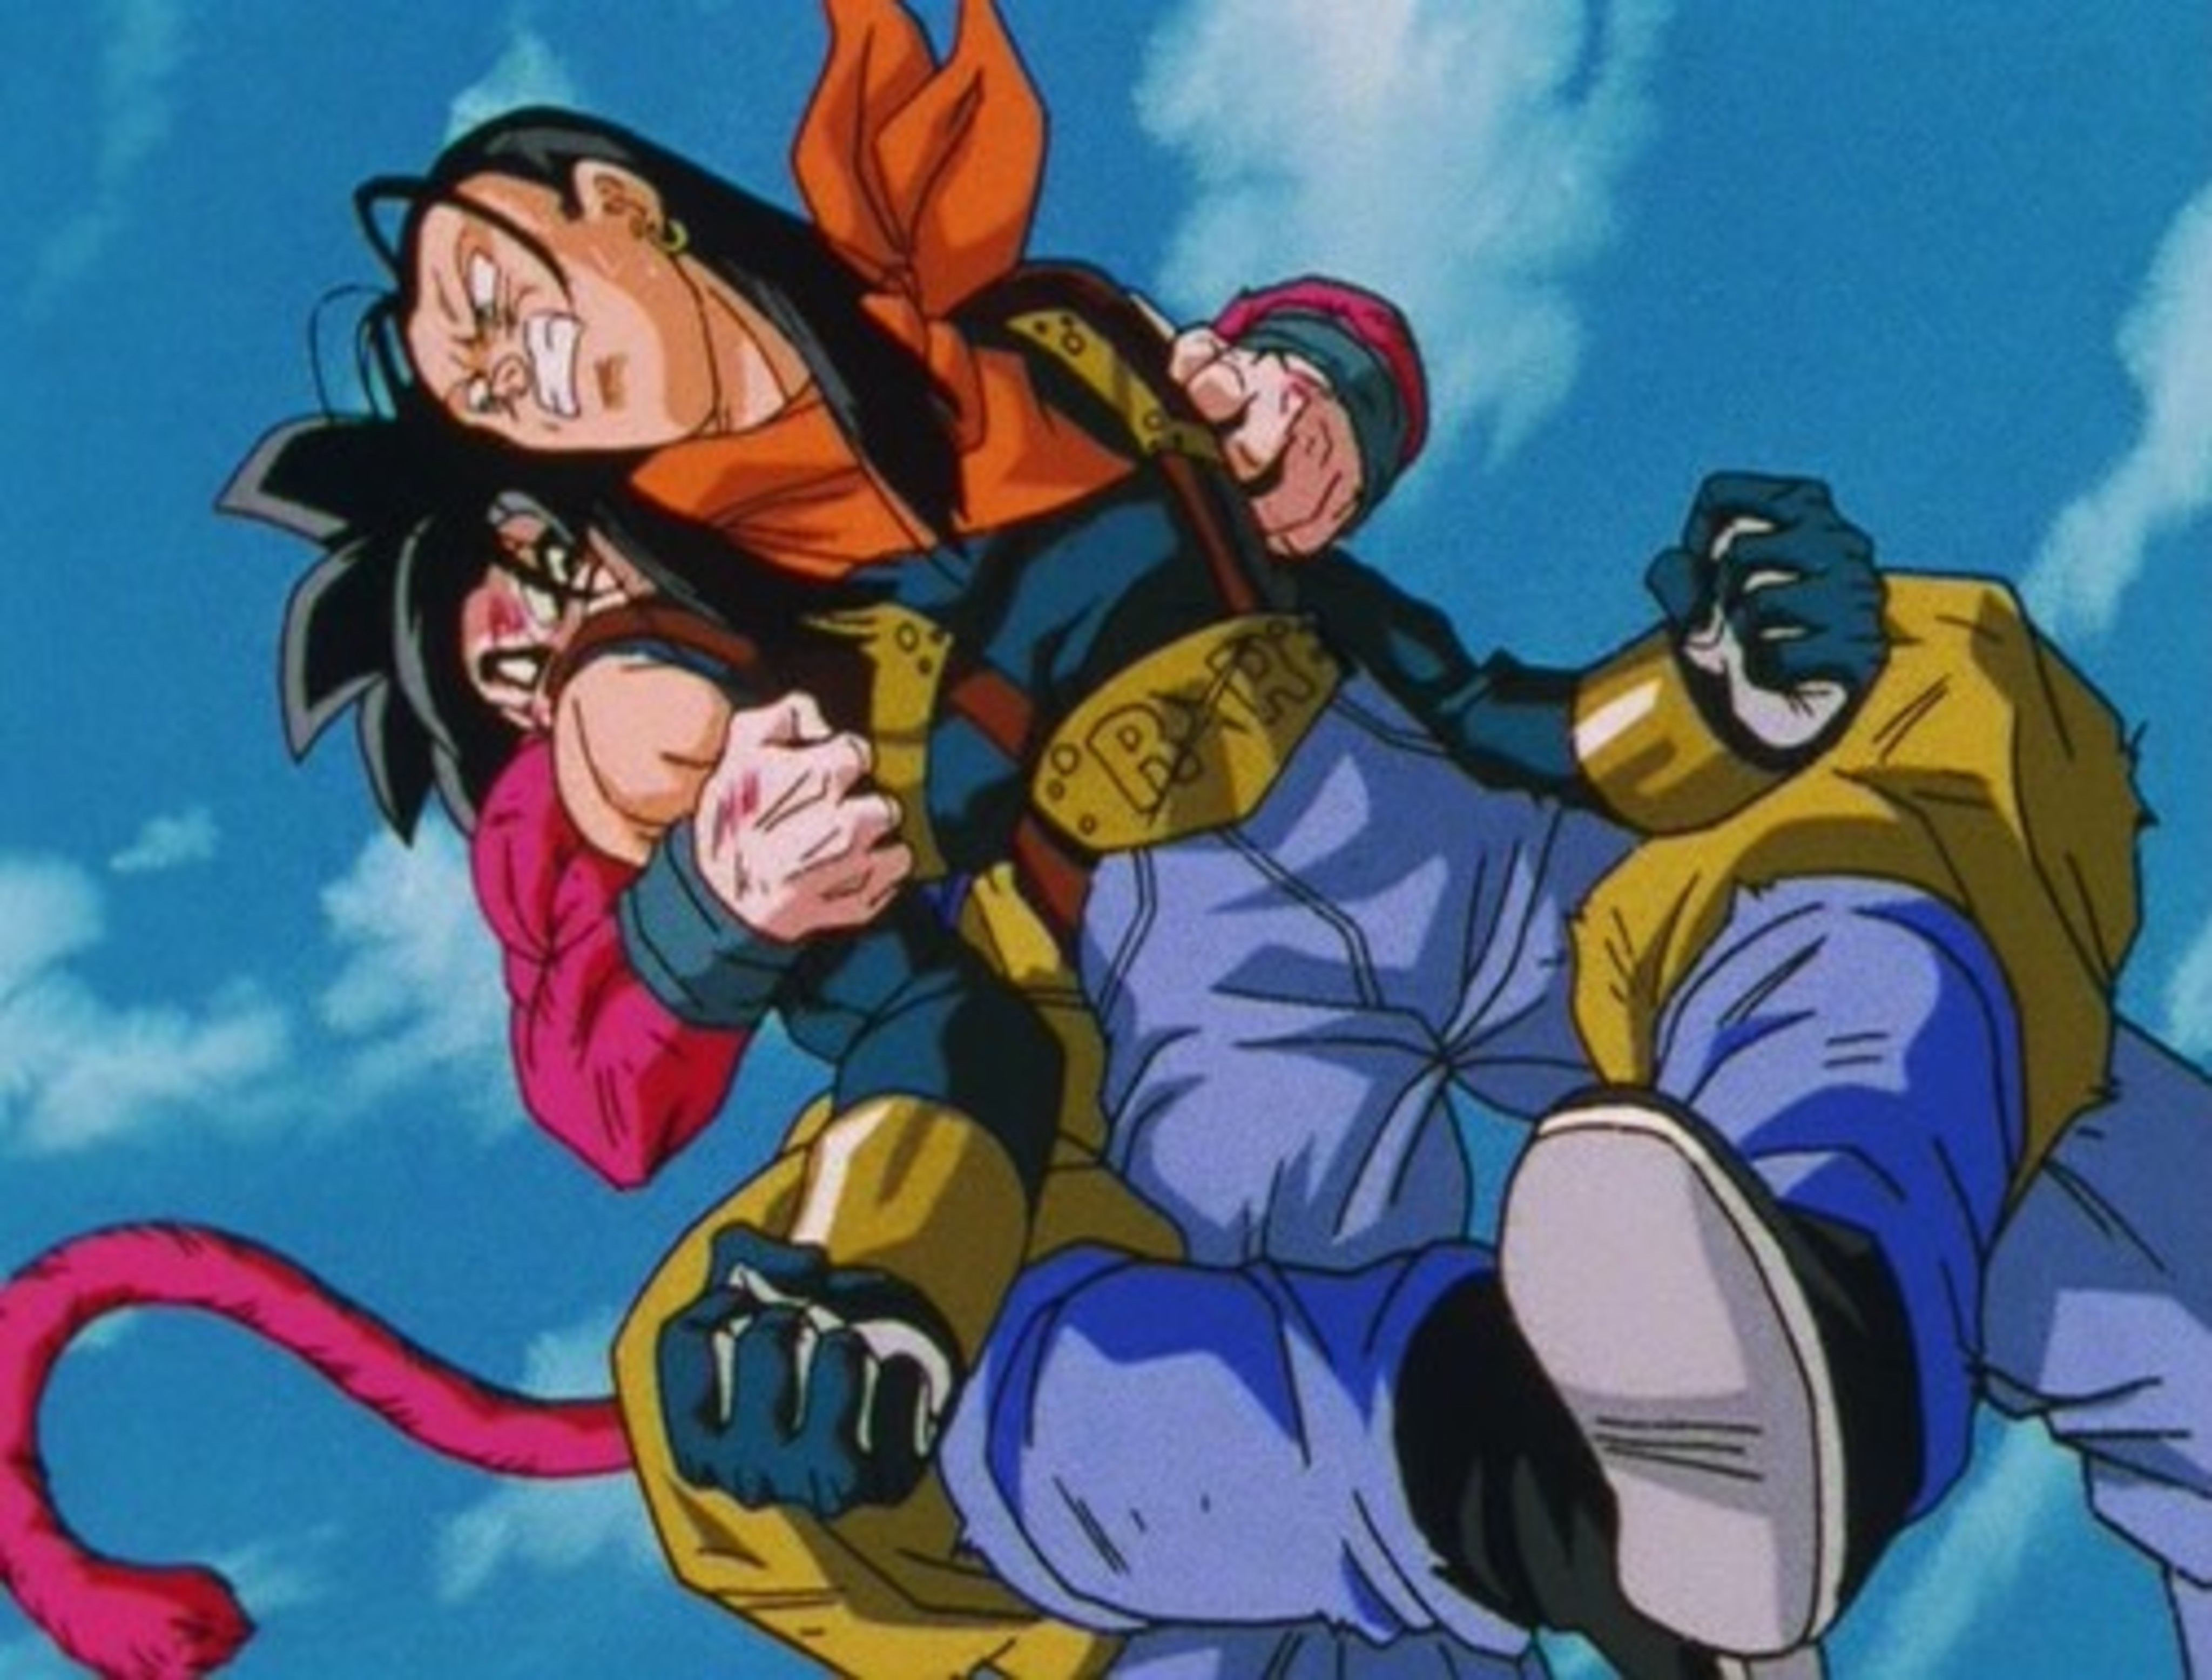 Dragon Ball GT: Super Android 17 Saga, Episode 6 - Rotten Tomatoes